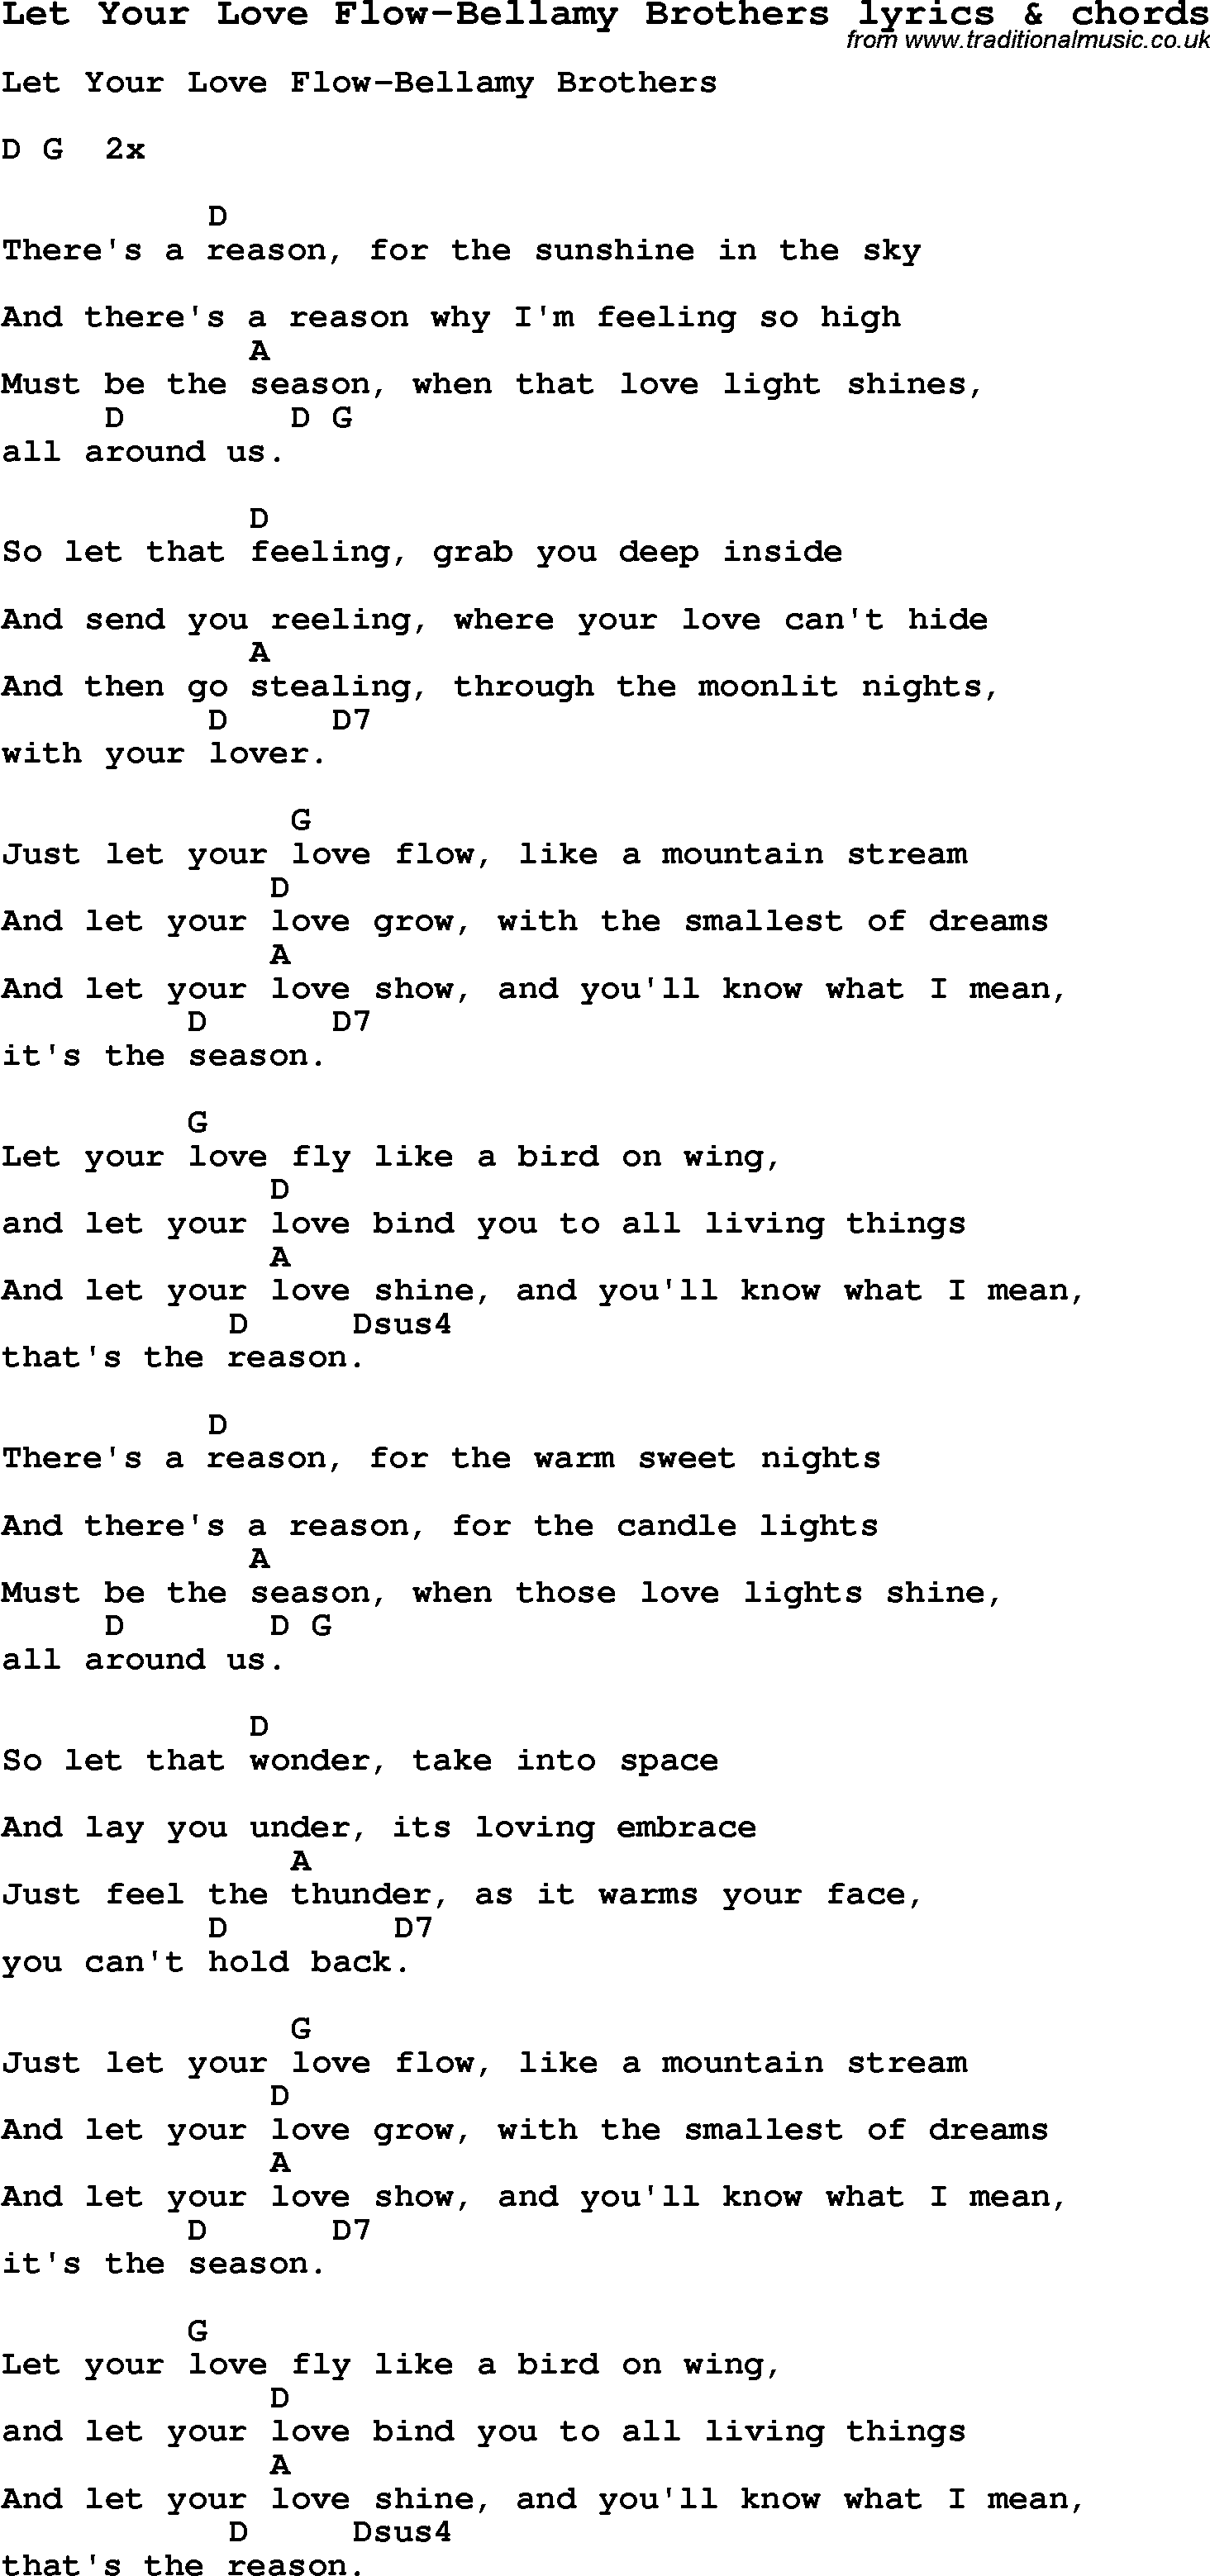 Love Song Lyrics for: Let Your Love Flow-Bellamy Brothers with chords for Ukulele, Guitar Banjo etc.